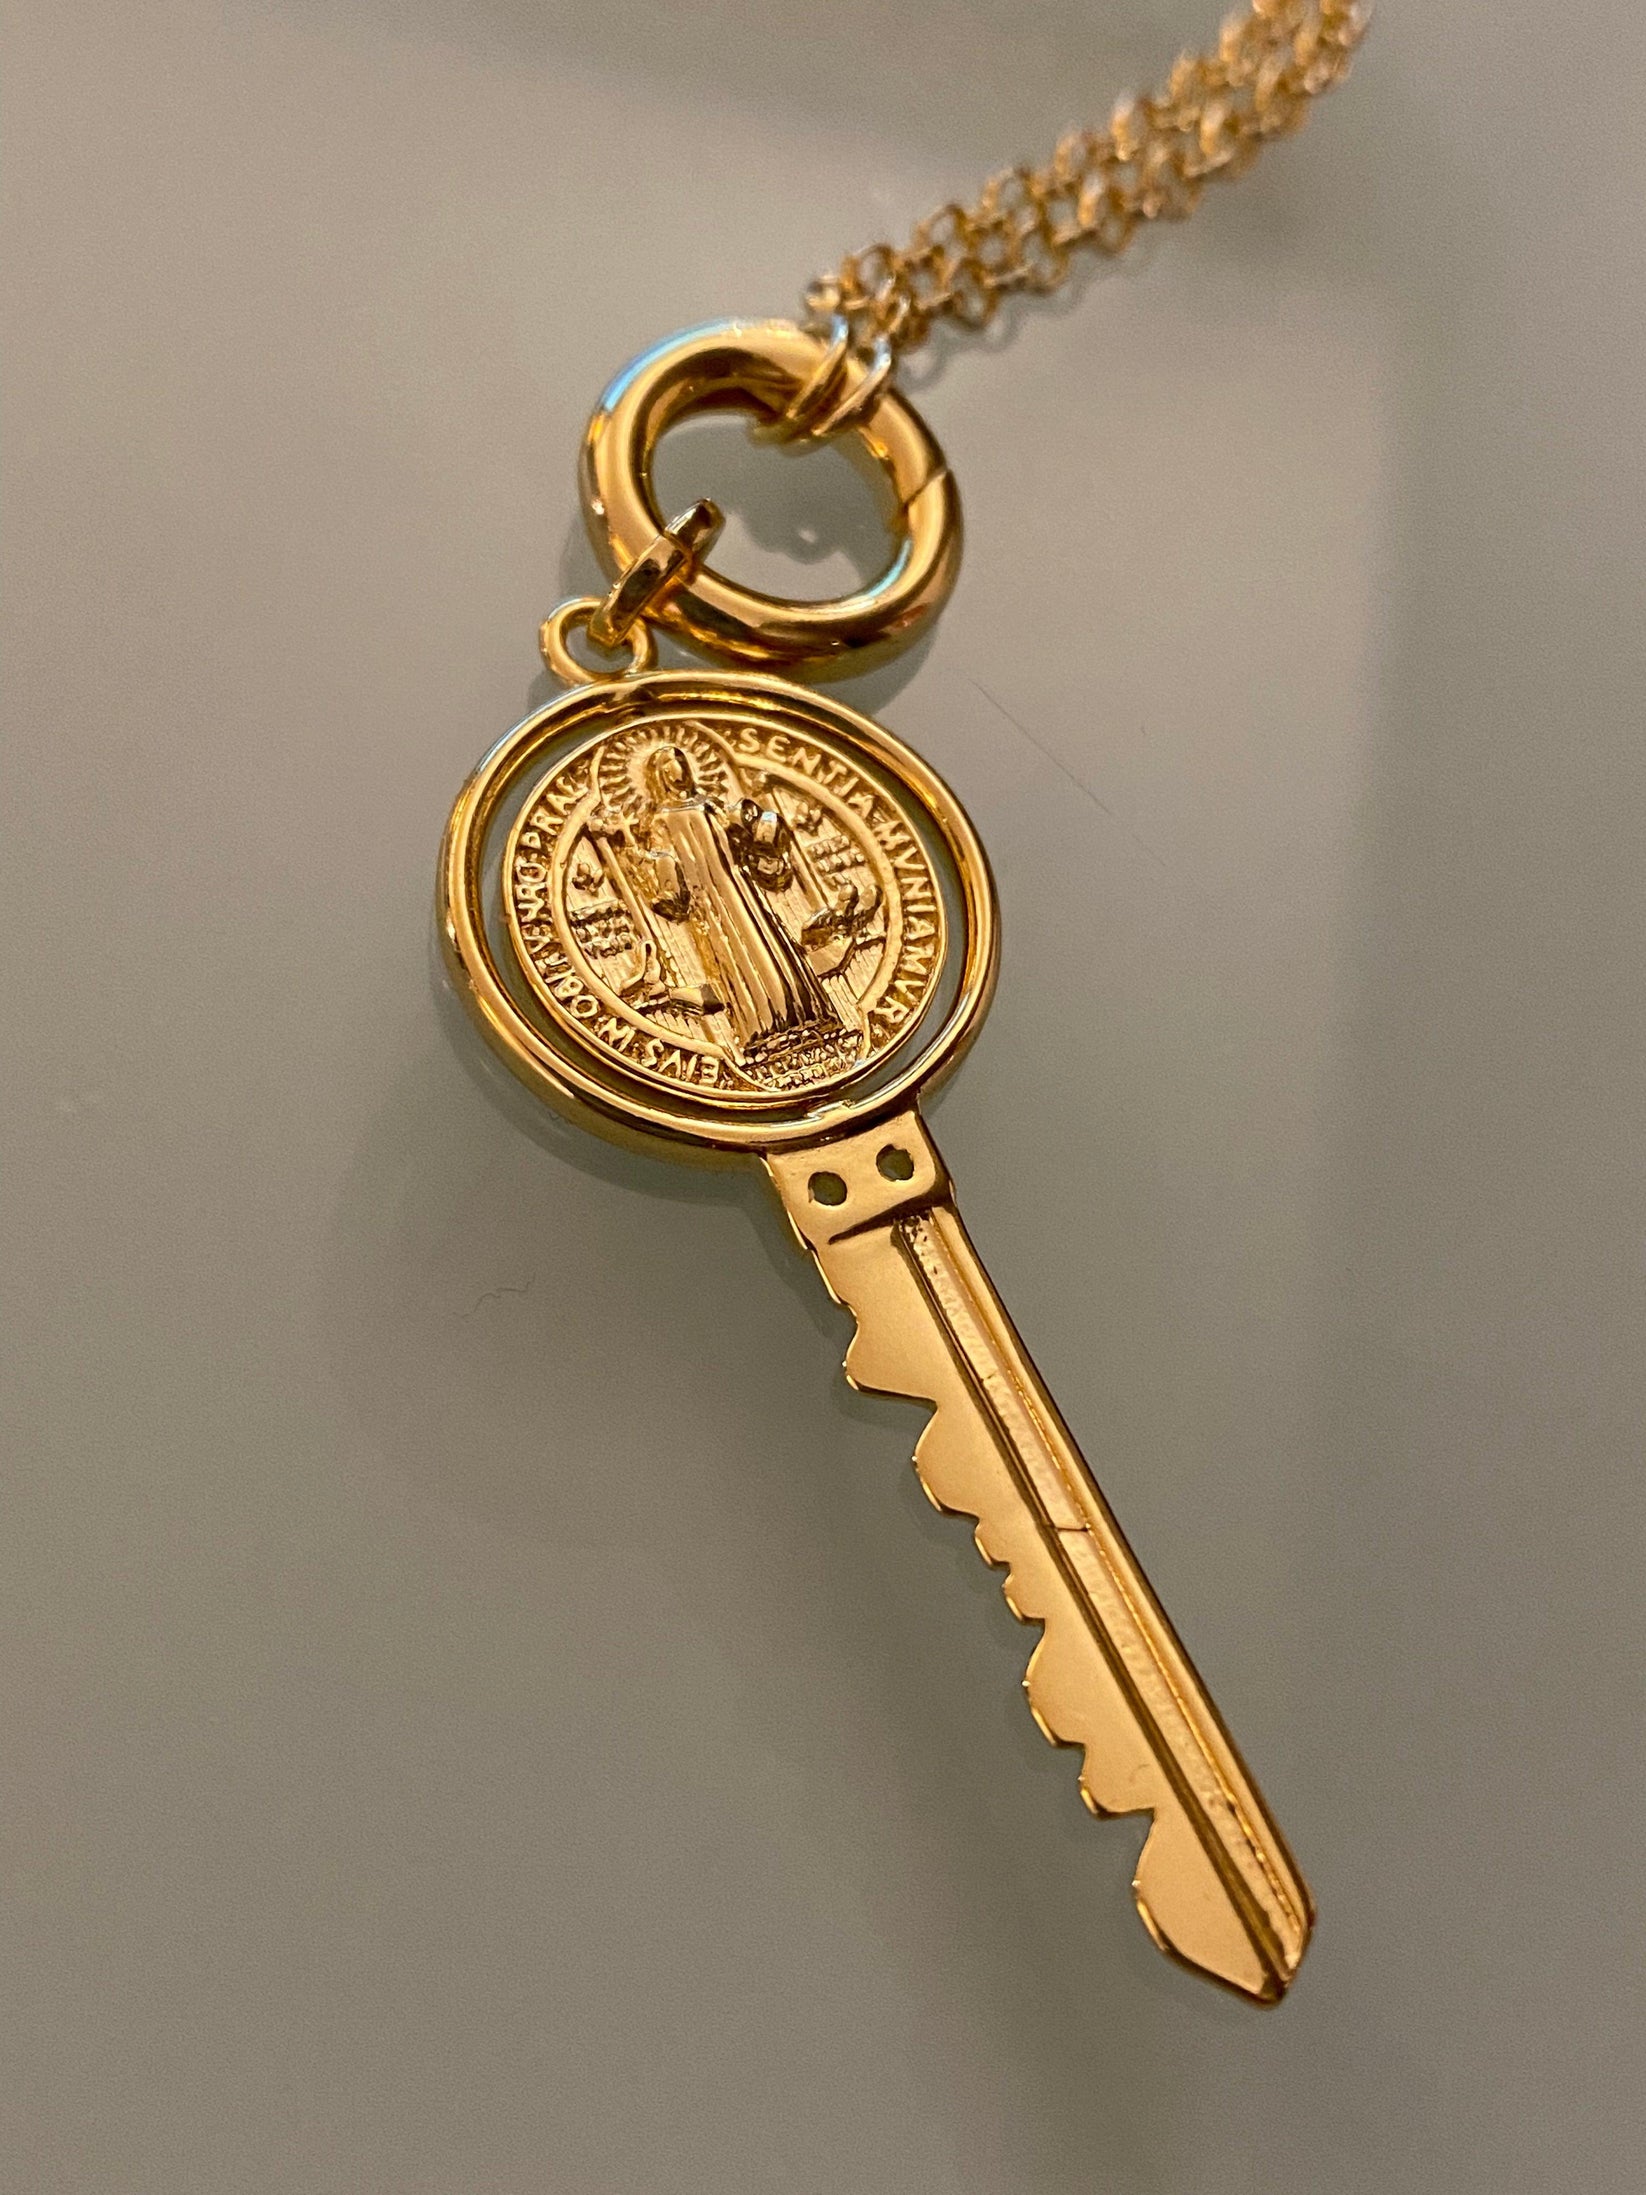 18k Gold Filled Key Pendant Featuring Swivel Medal Of St. Benedict Charm